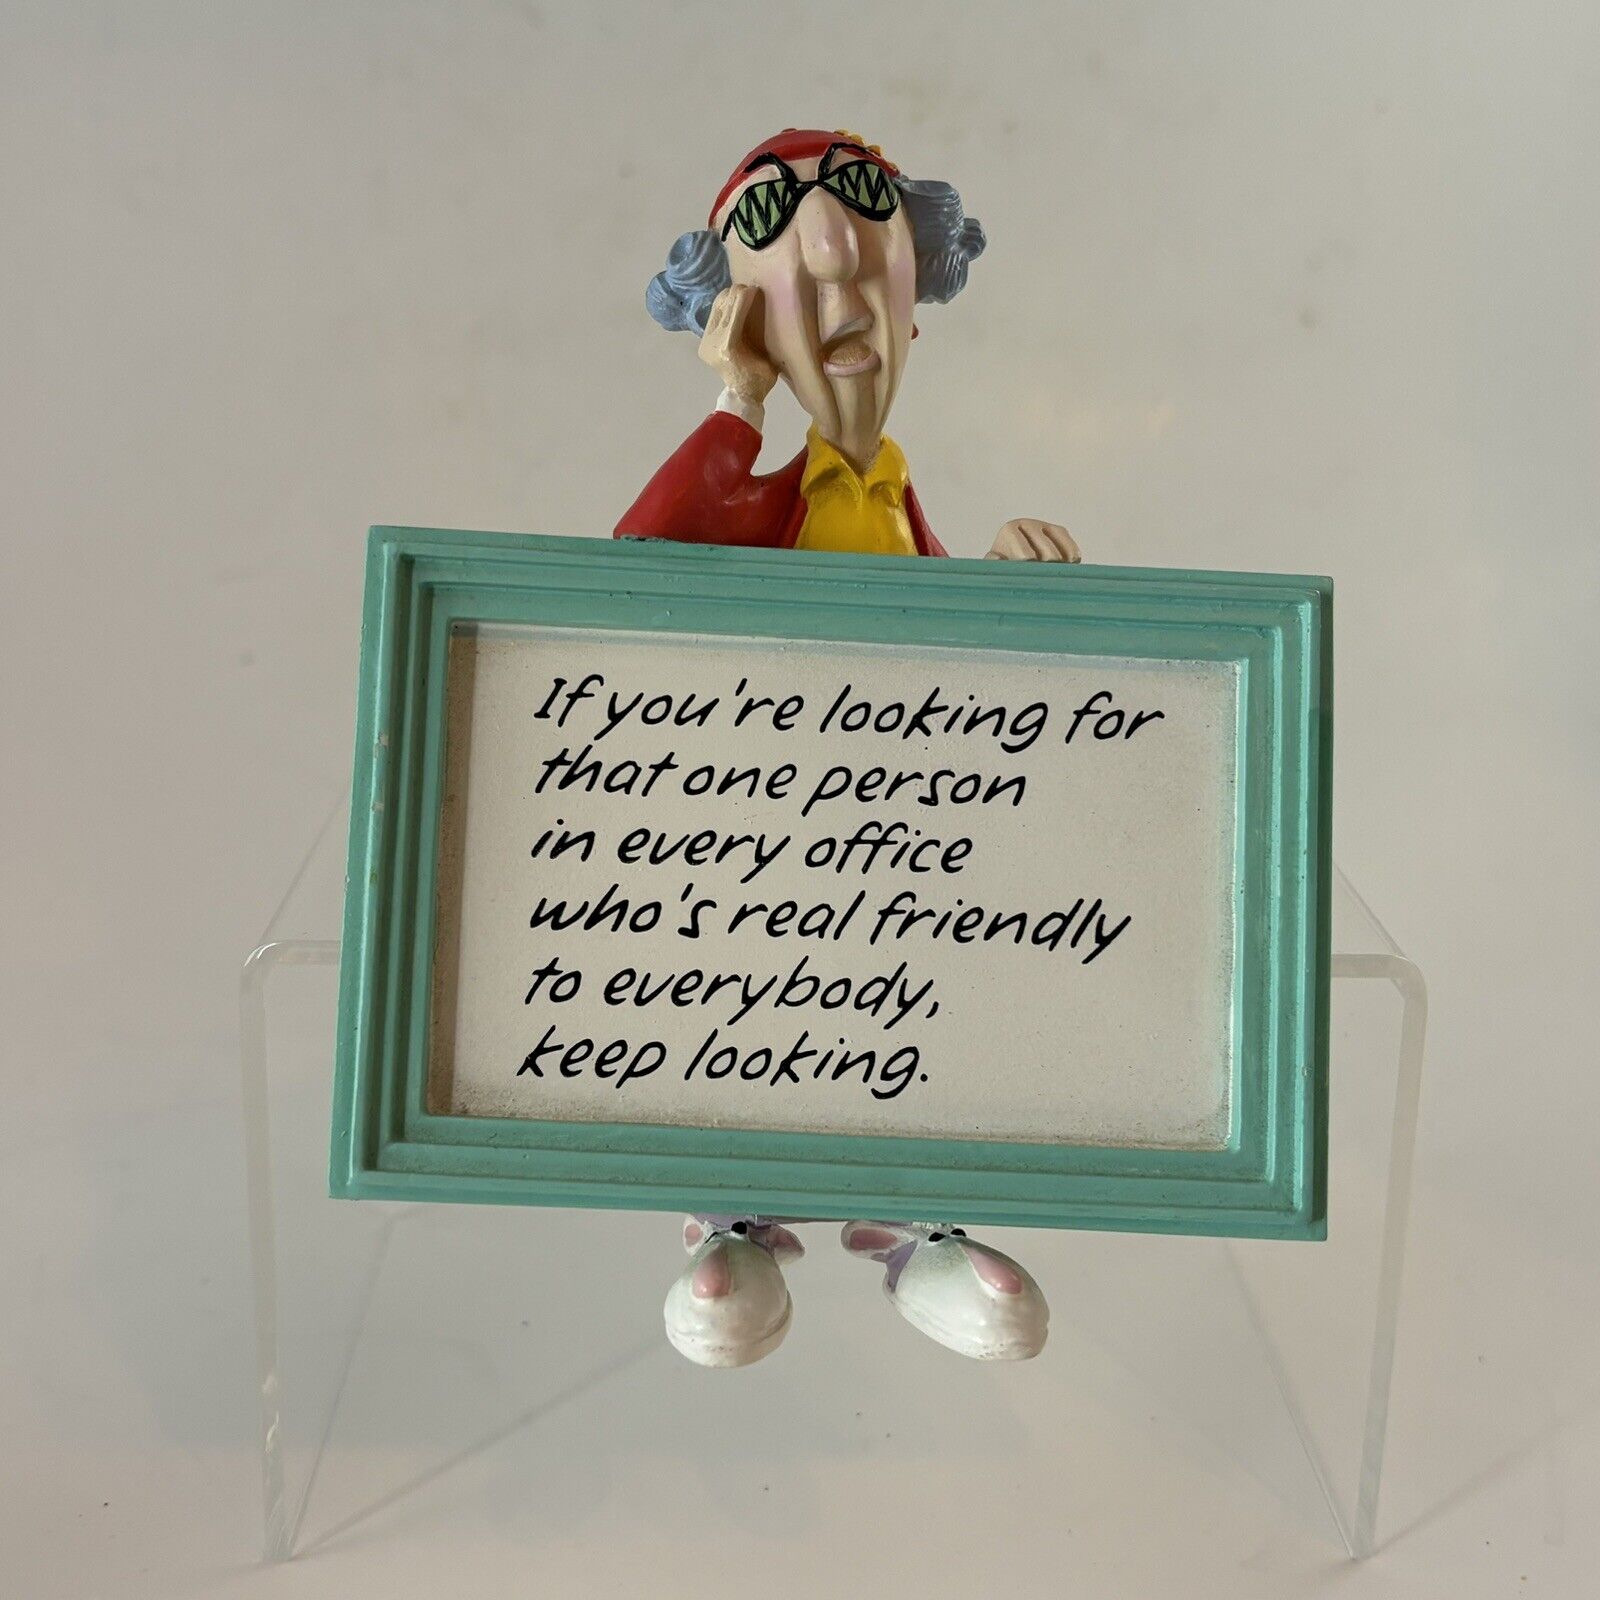 Vtg Hallmark MAXINE Looking For That One Person In Every Office Shelf Sitter